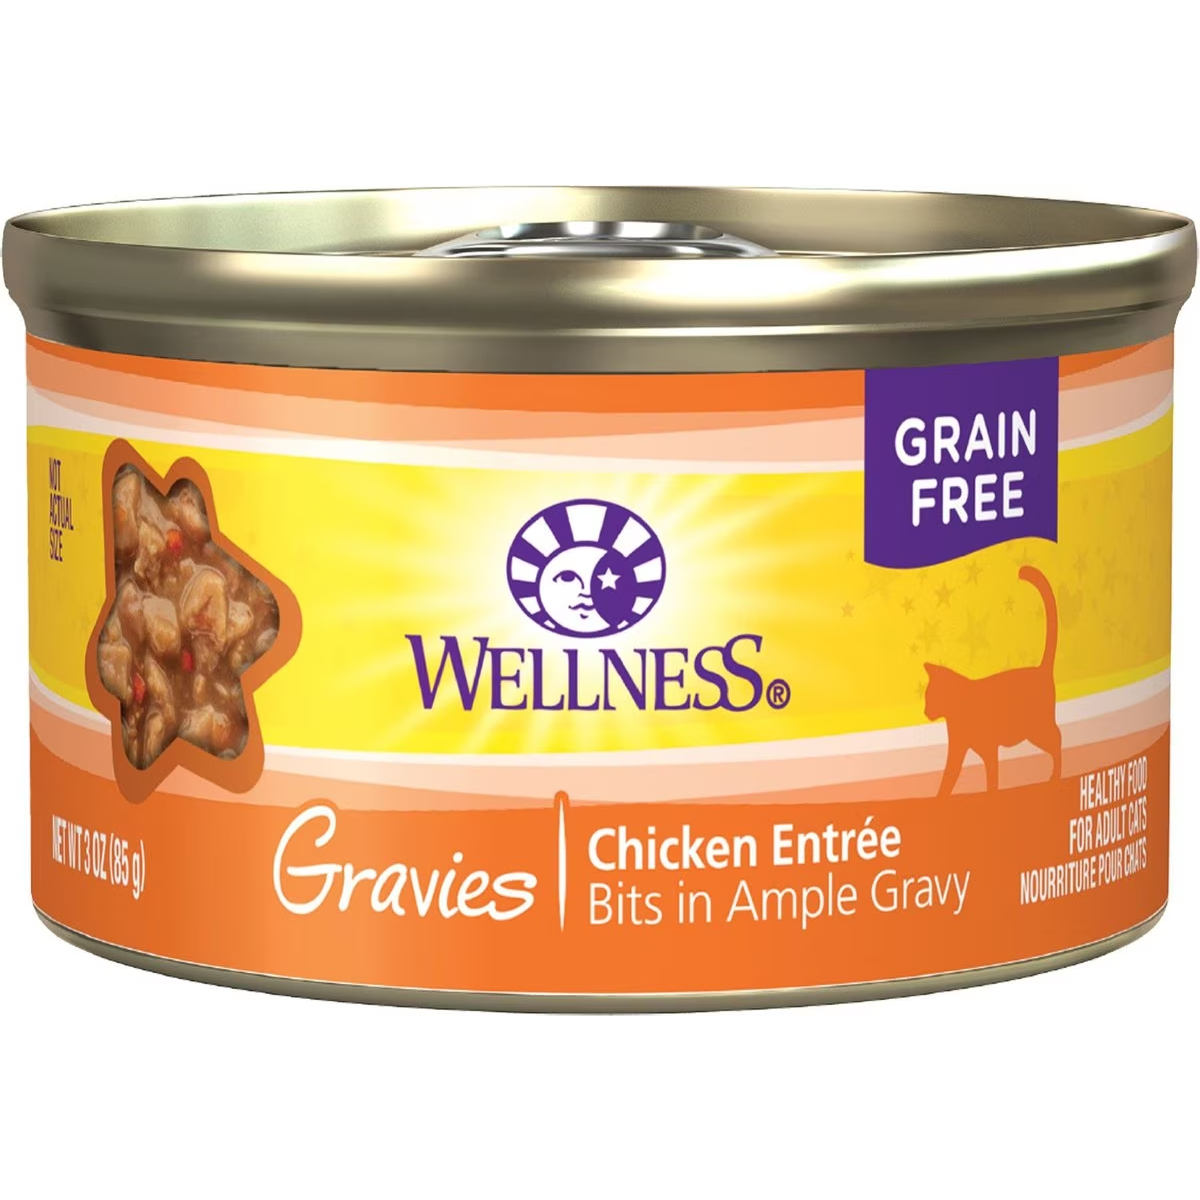 Wellness Gravies Chicken Dinner Canned Cat Food new